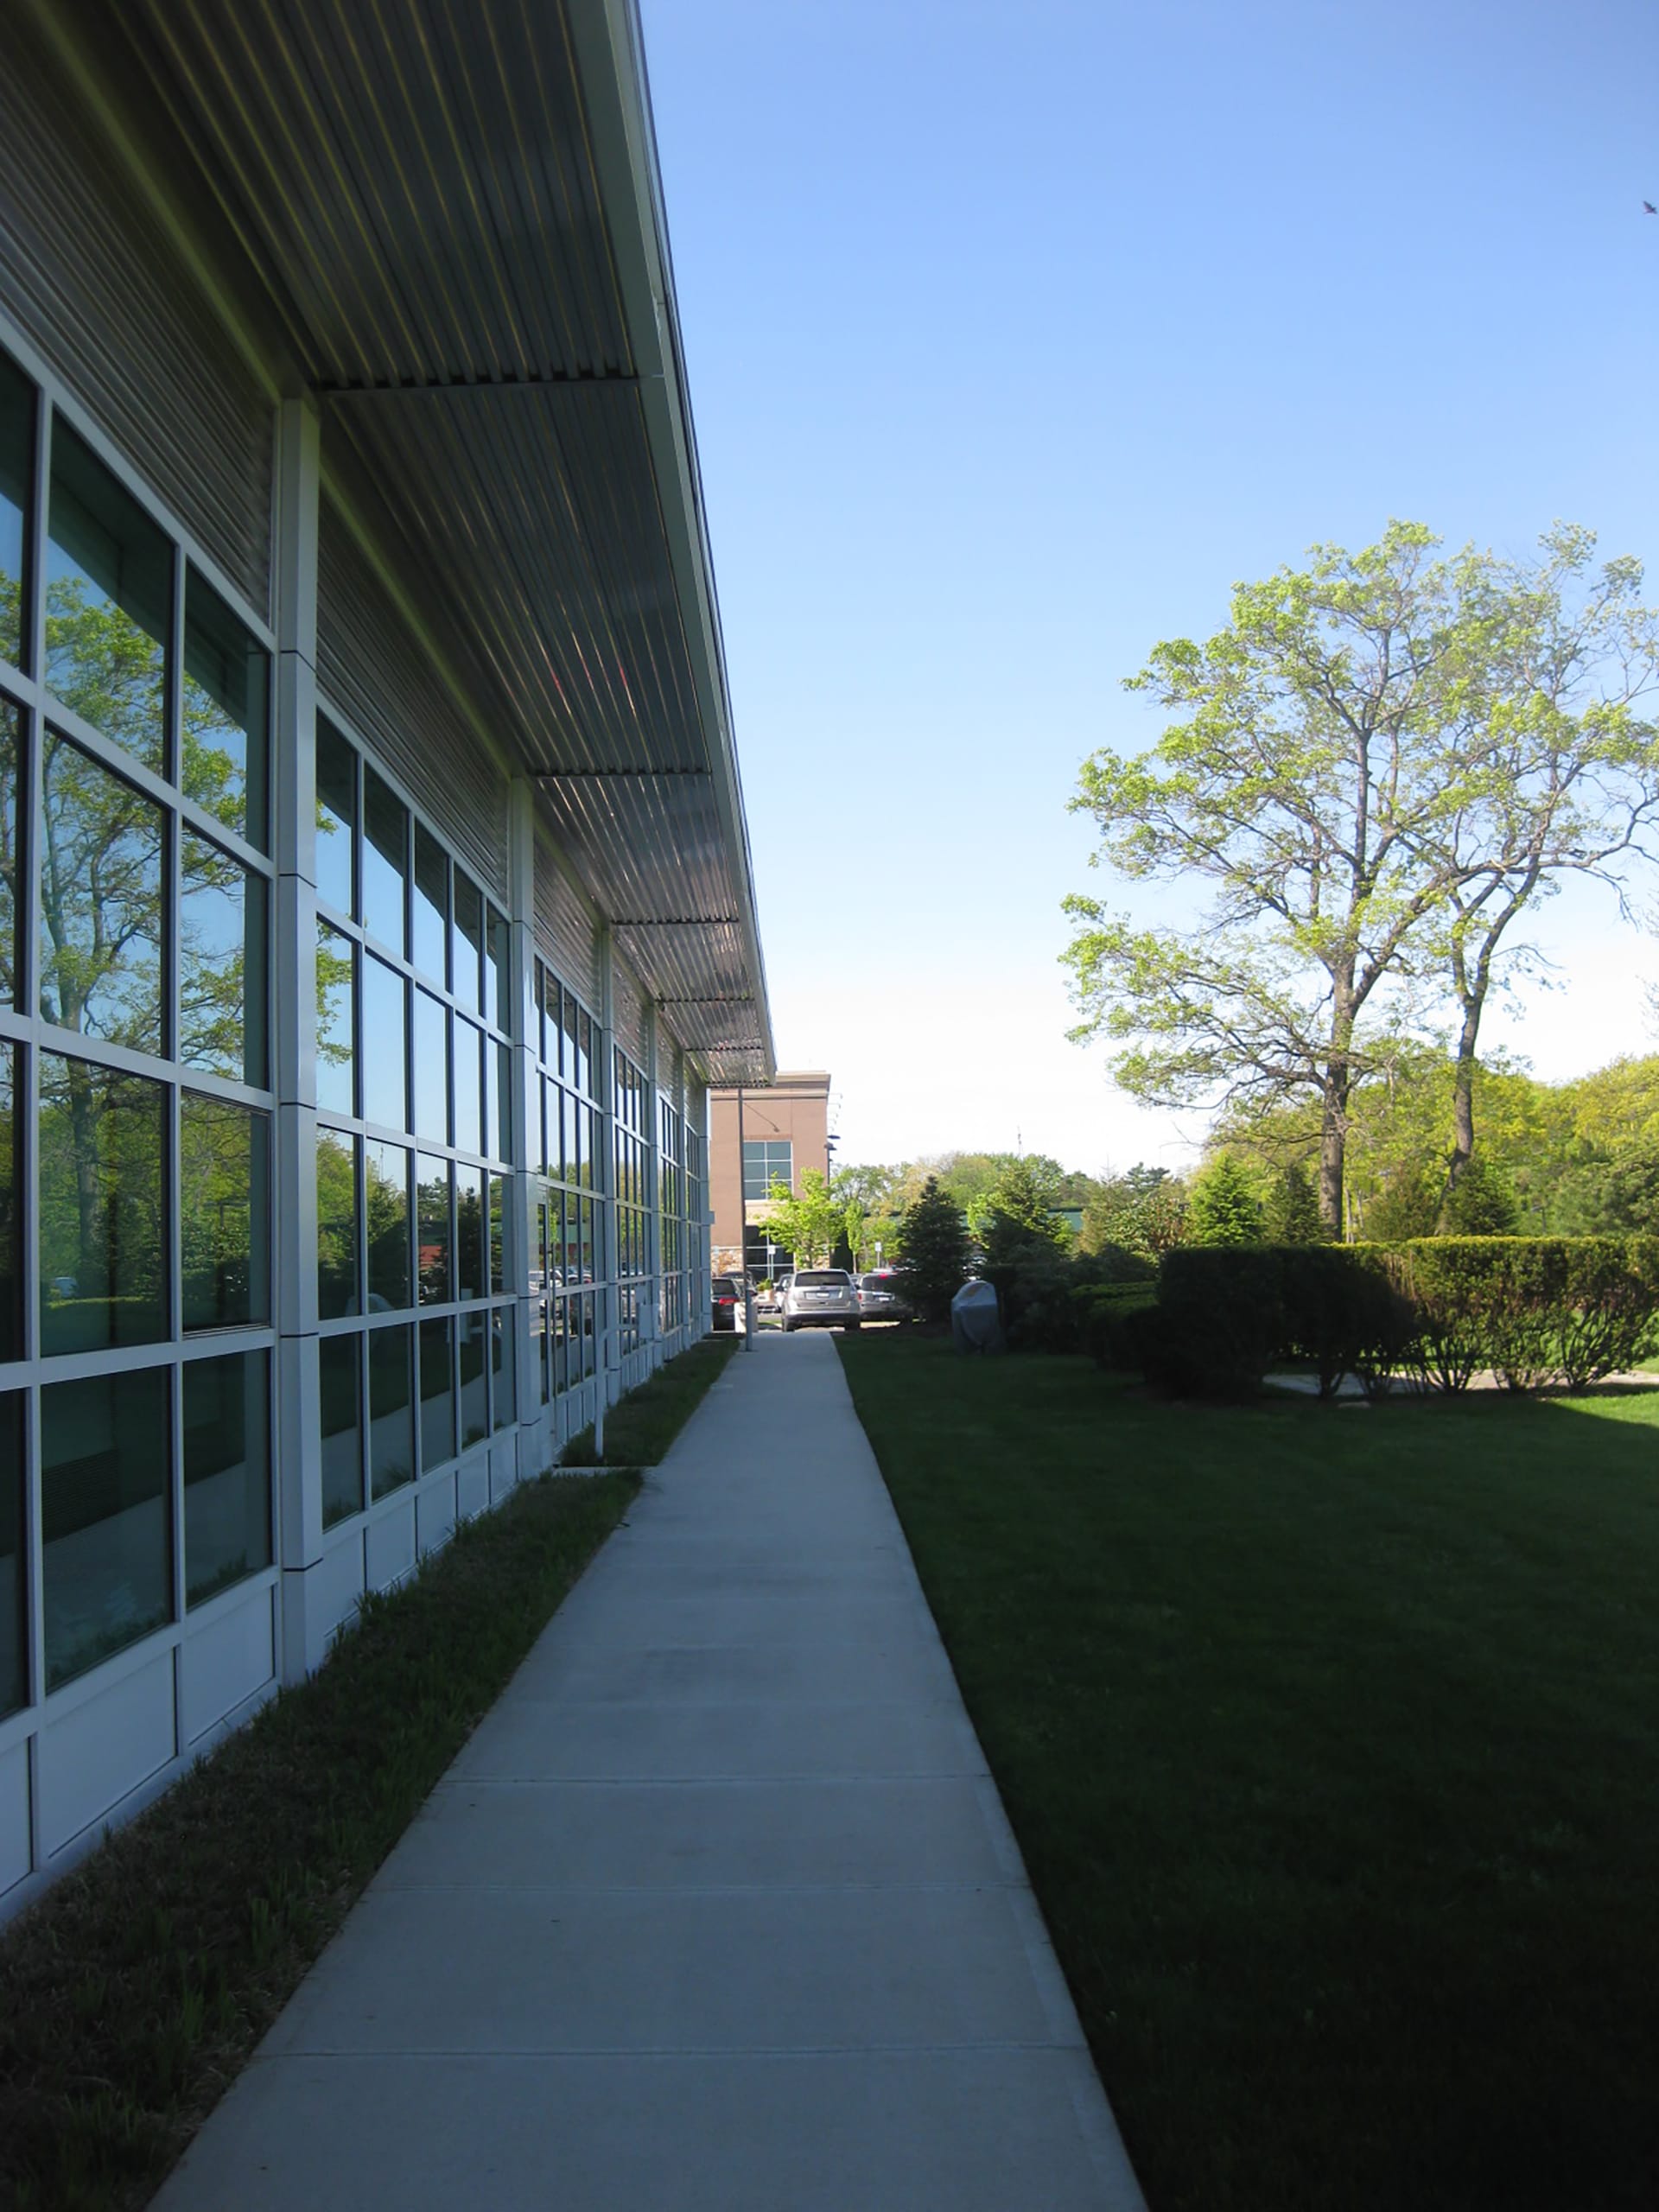 Exterior of a bicycle shop, with a parking lot, large expanses of glass, and bushes in front of the building.